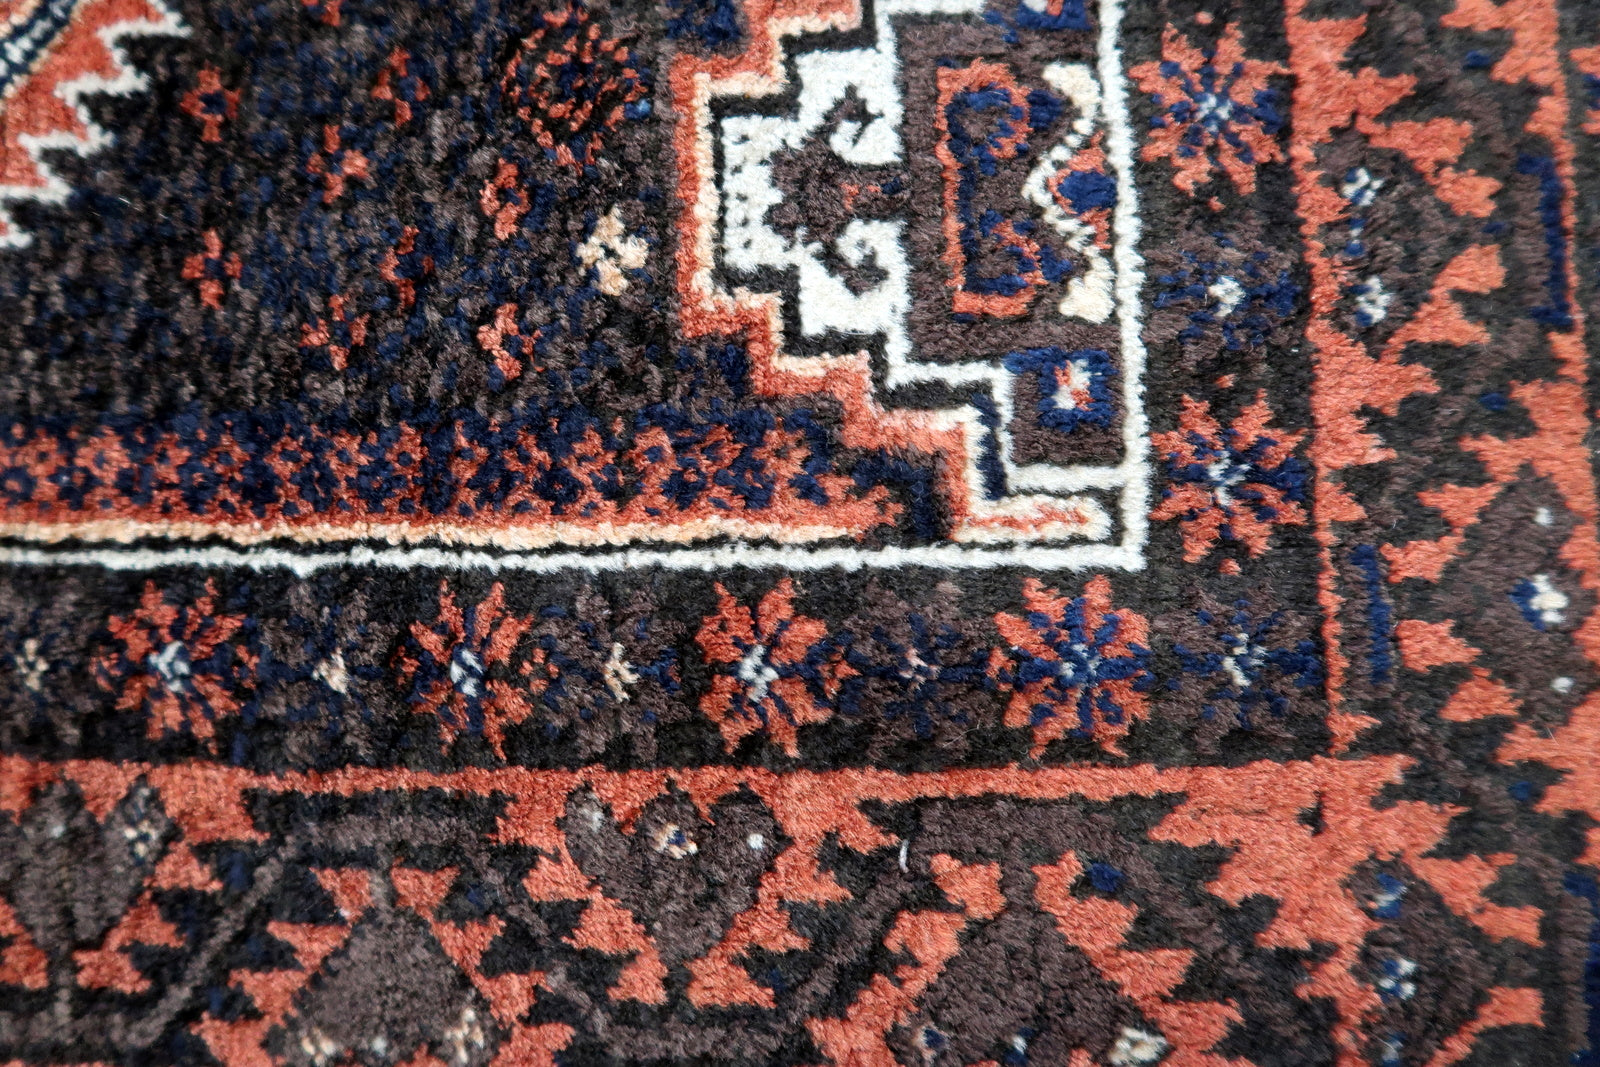 Handmade antique Afghan Baluch rug in traditional tribal design. The rug is from the beginning of 20th century in original condition, it yhas some minimal low pile.